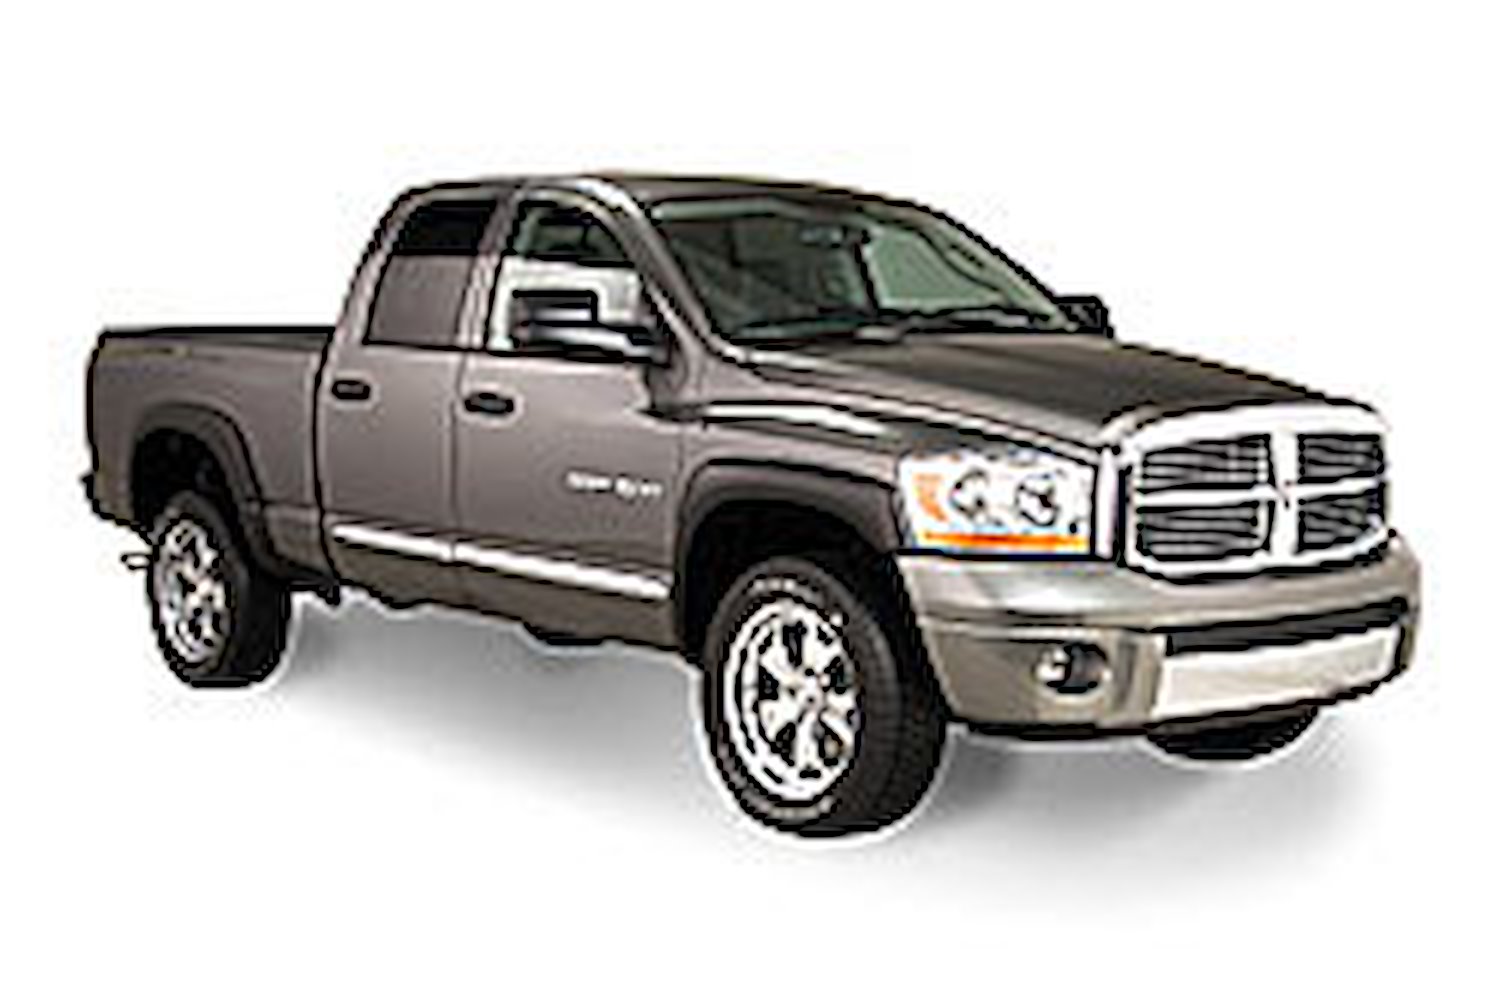 OE-Style Fender Flares 2006-09 Dodge Ram 1500/2500/3500 (8"2" Bed)